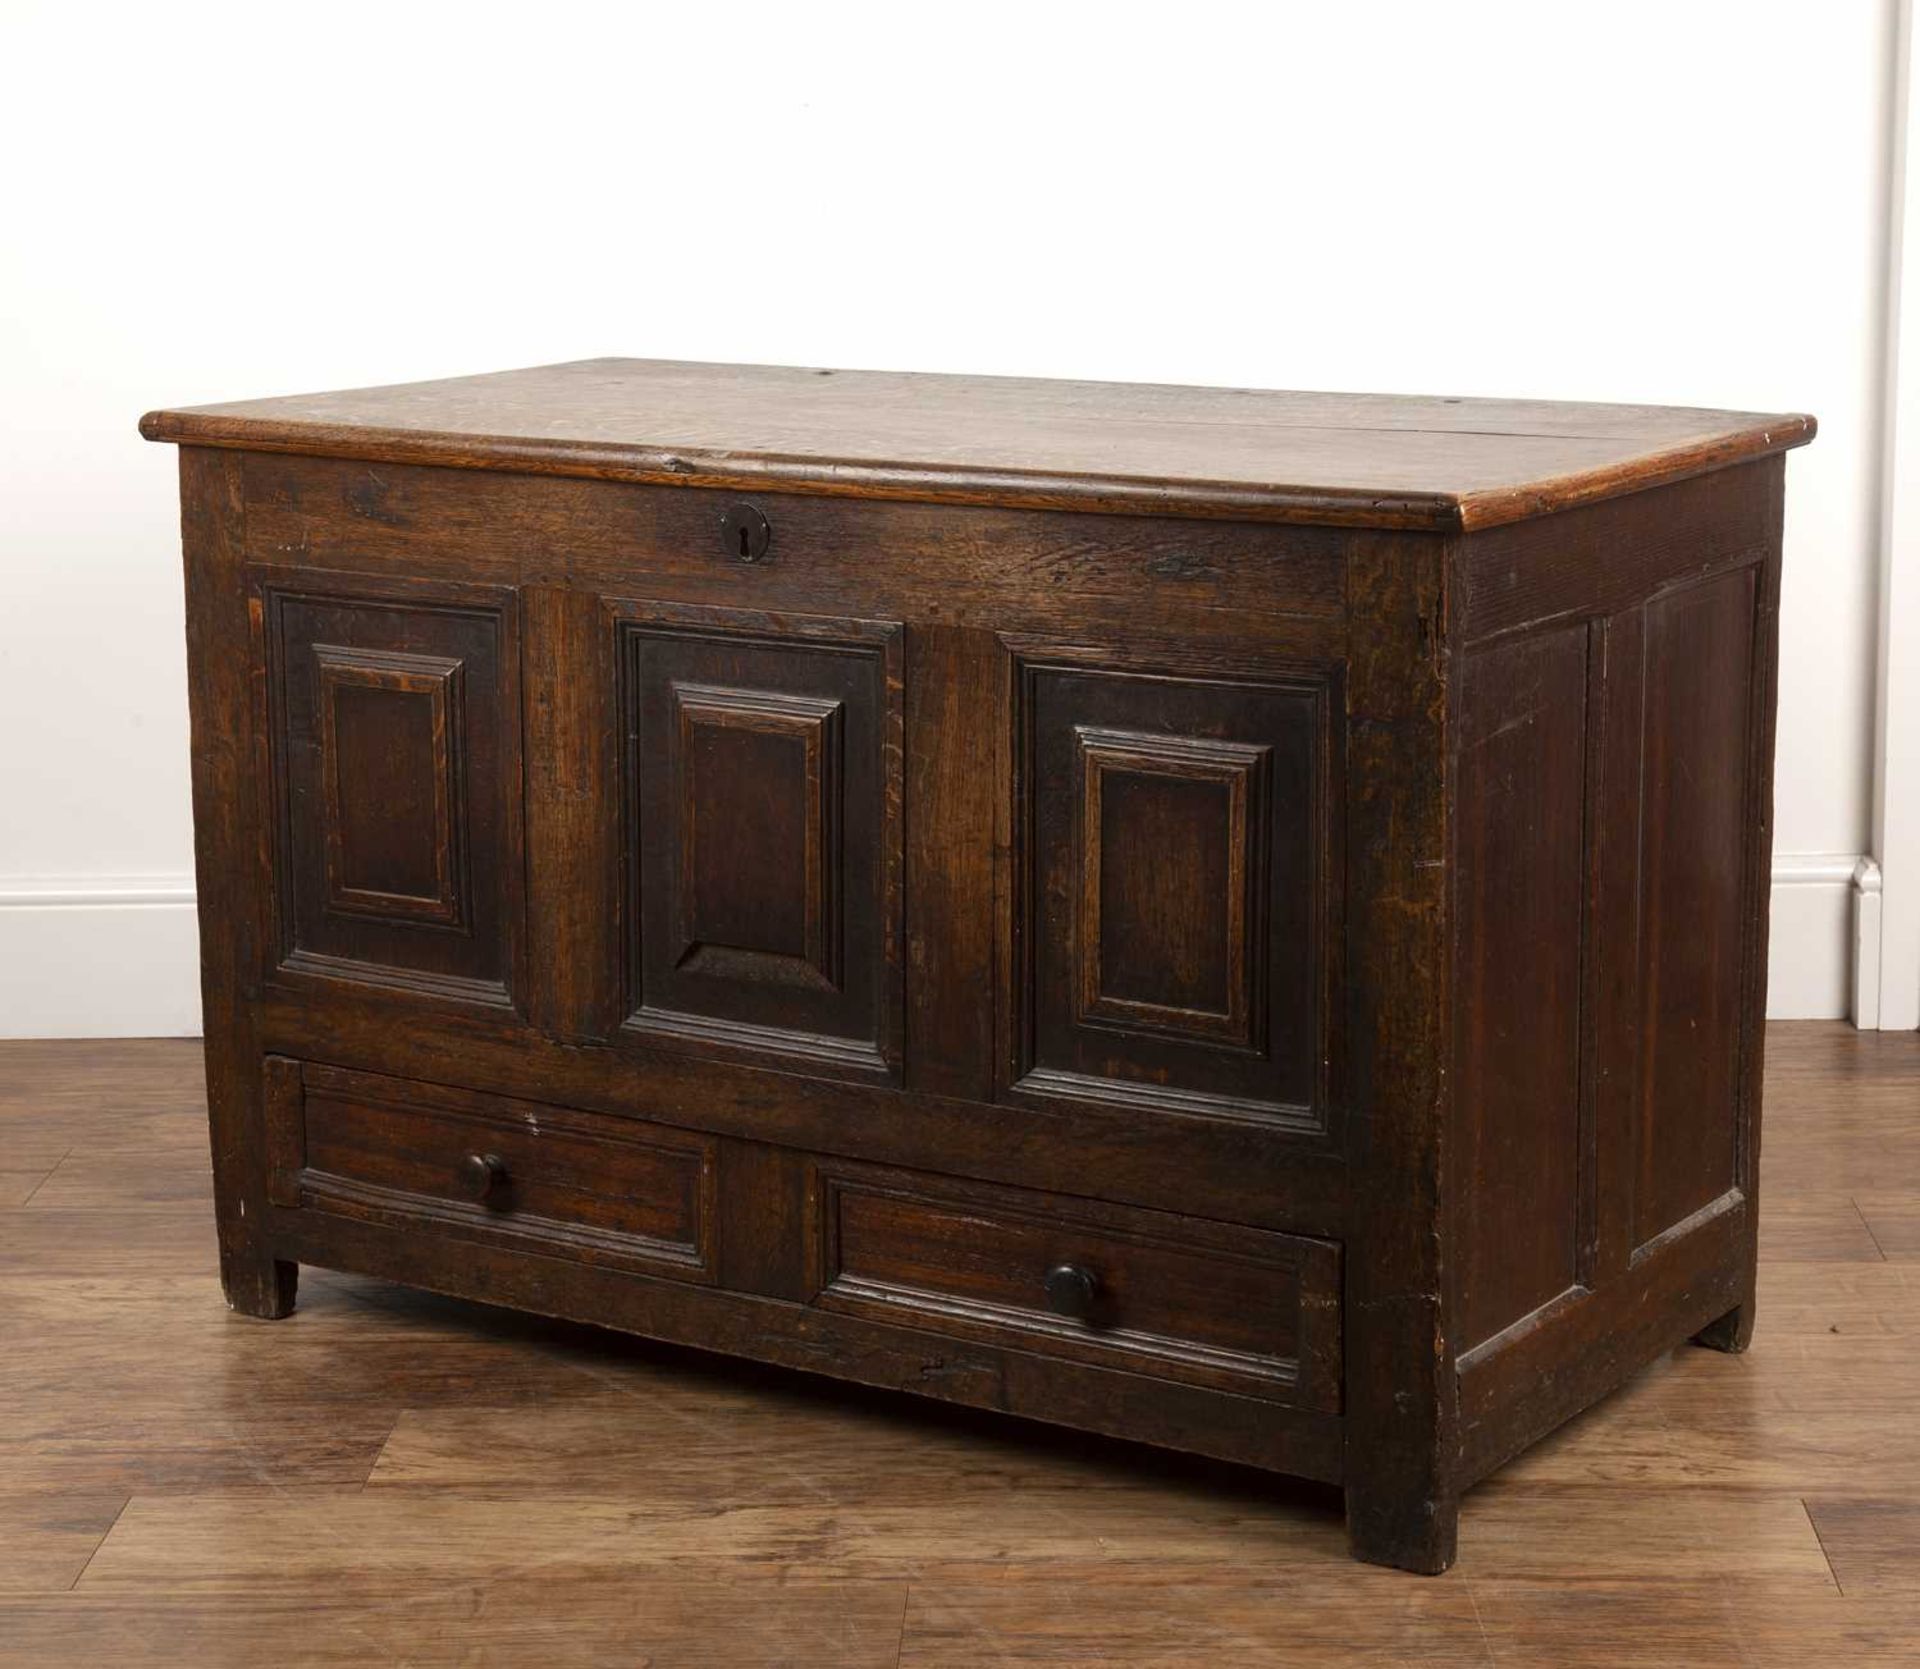 Oak mule chest with triple moulded front, and with two fitted drawers, 118cm wide x 59cm deep x 76cm - Image 3 of 5